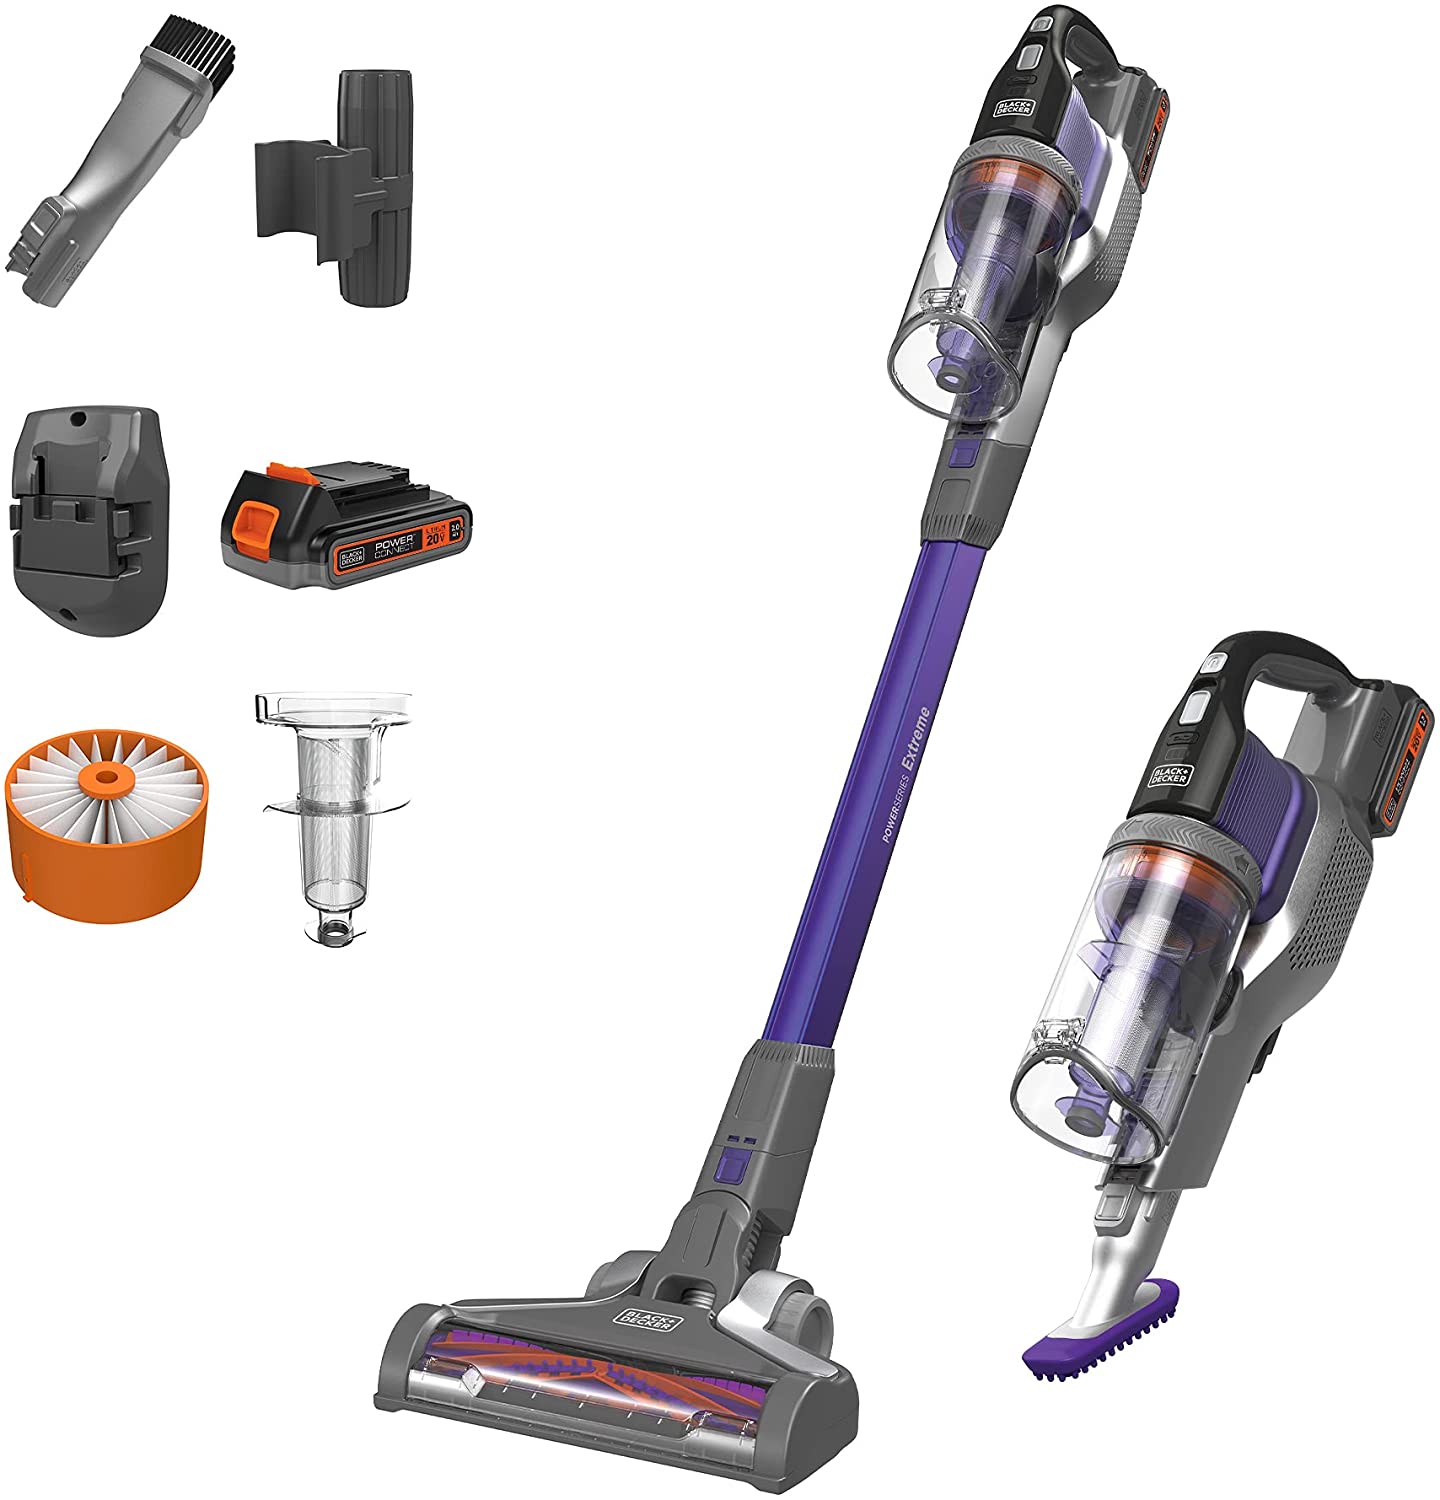 BLACK+DECKER Powerseries Extreme Cordless Stick Vacuum Cleaner for Pets (BSV2020P) $99 + Free Shipping